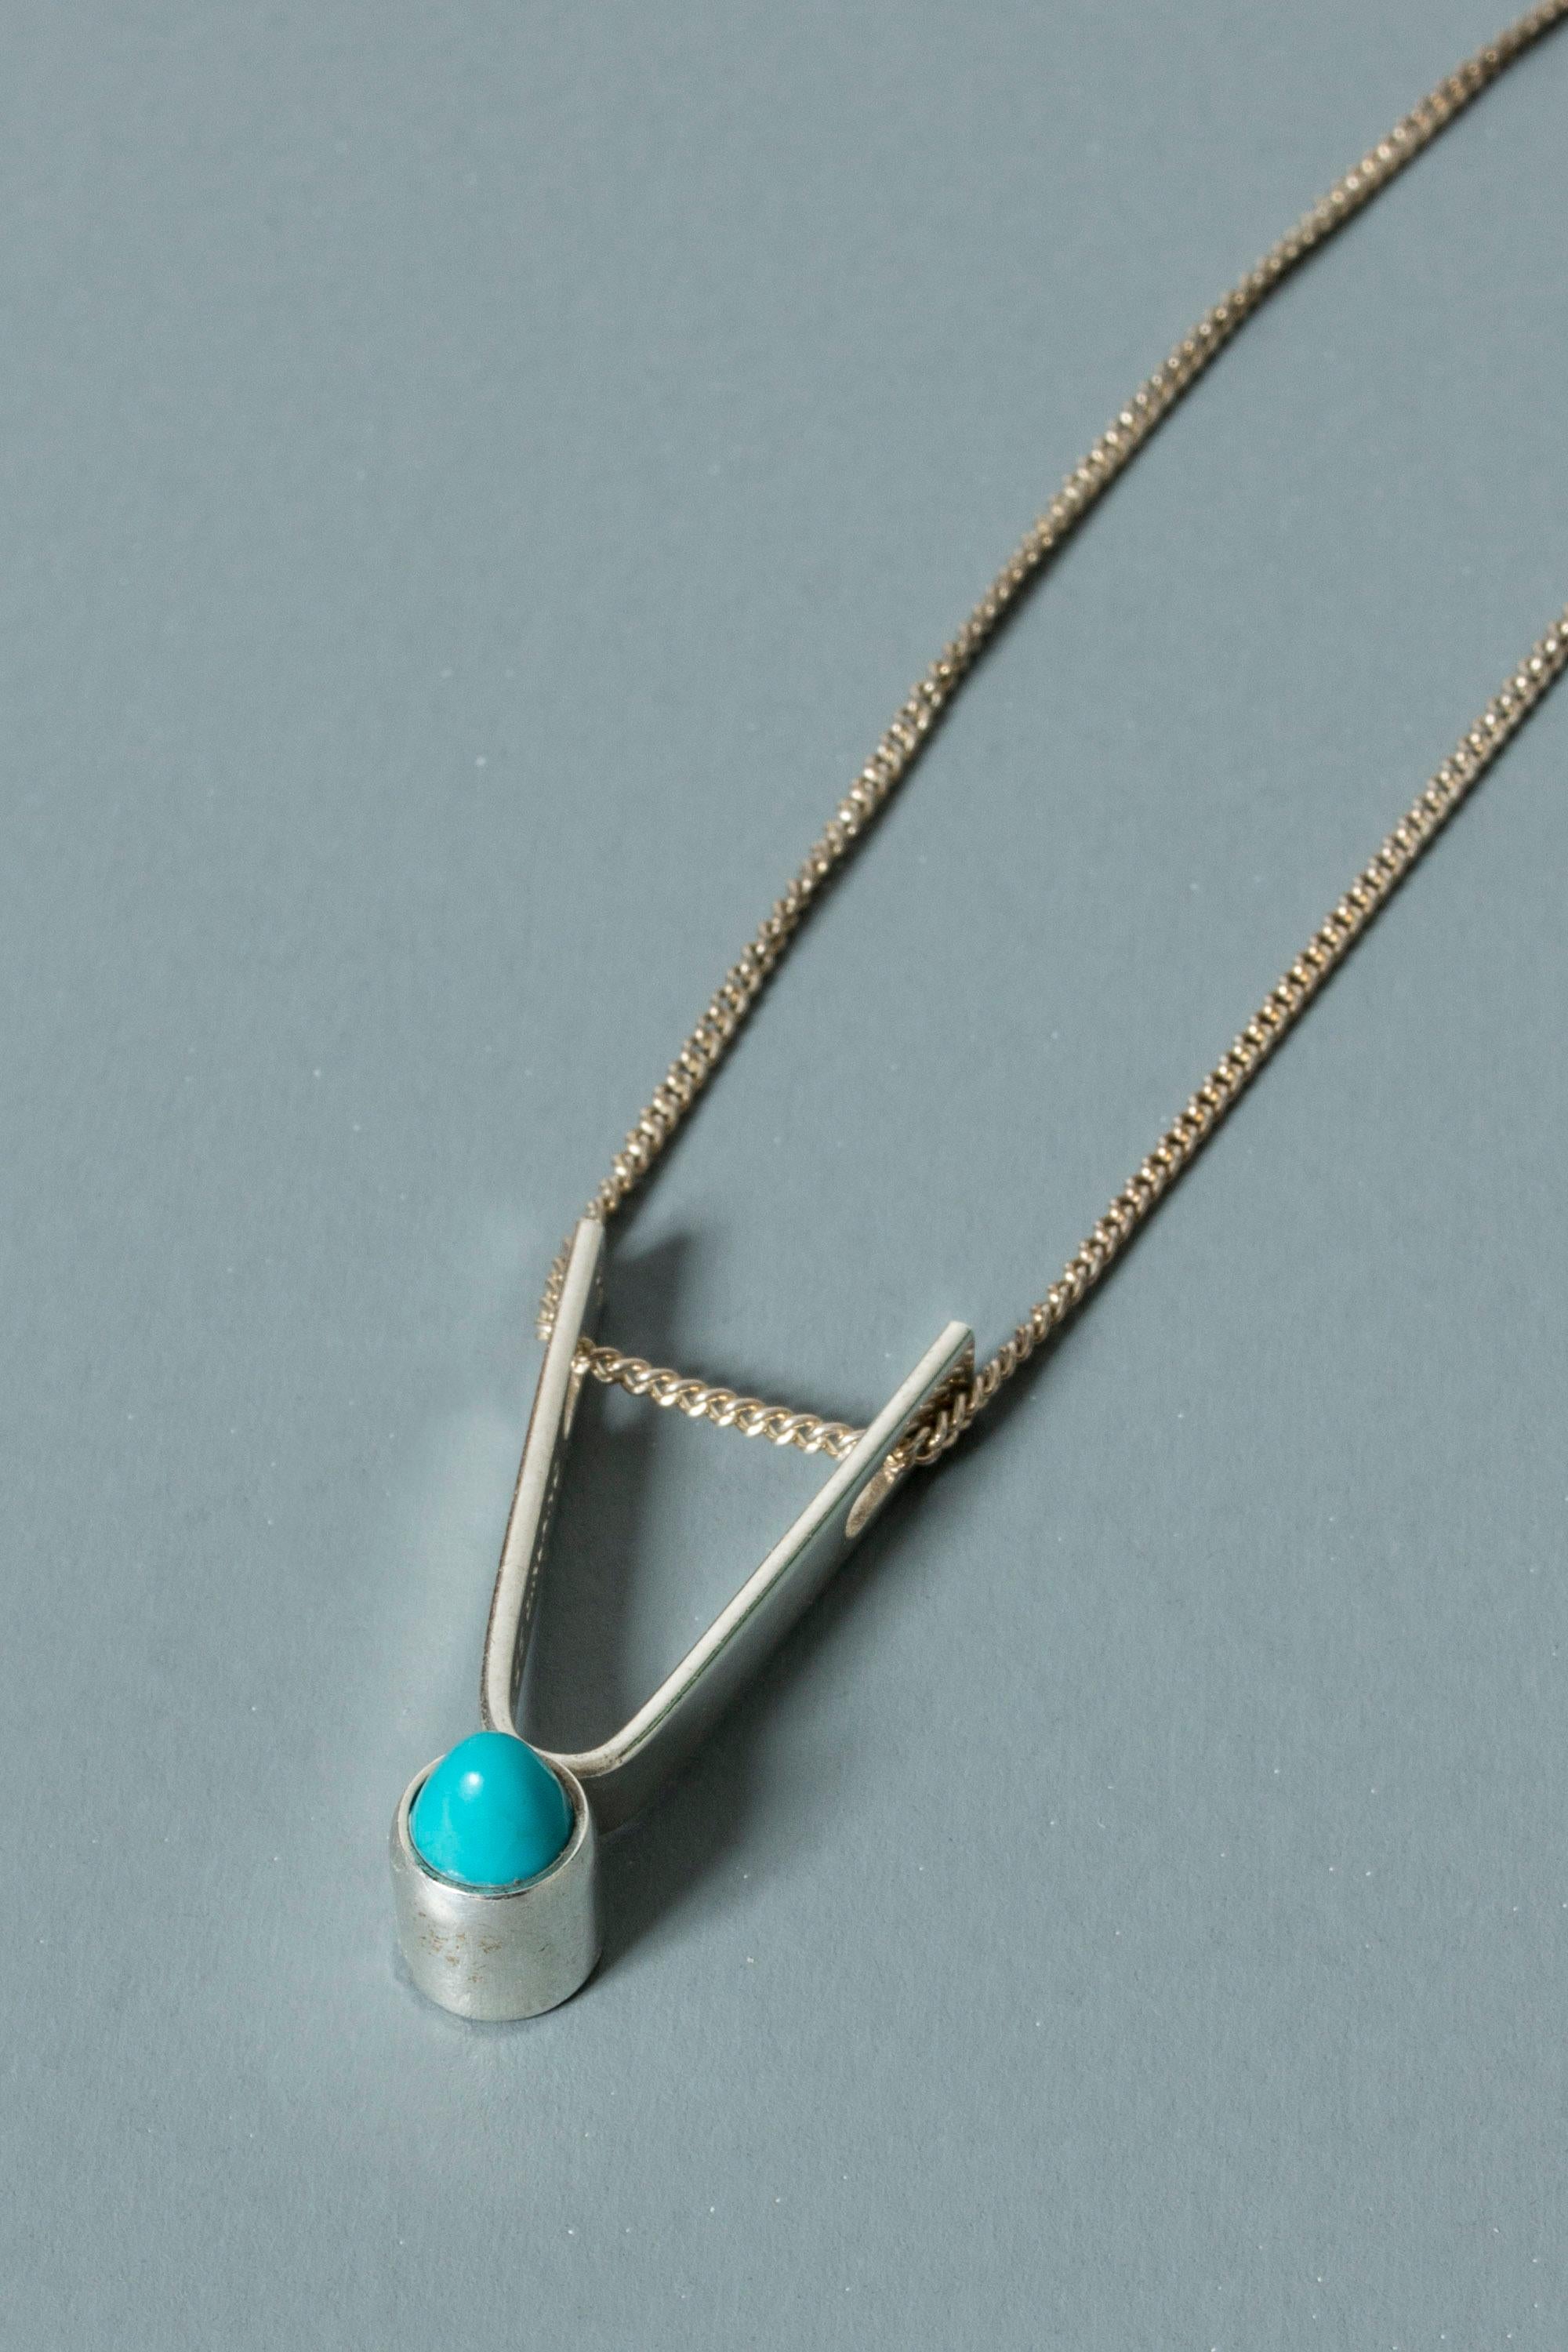 Modernist Silver and Turquoise Pendant by Elis Kauppi